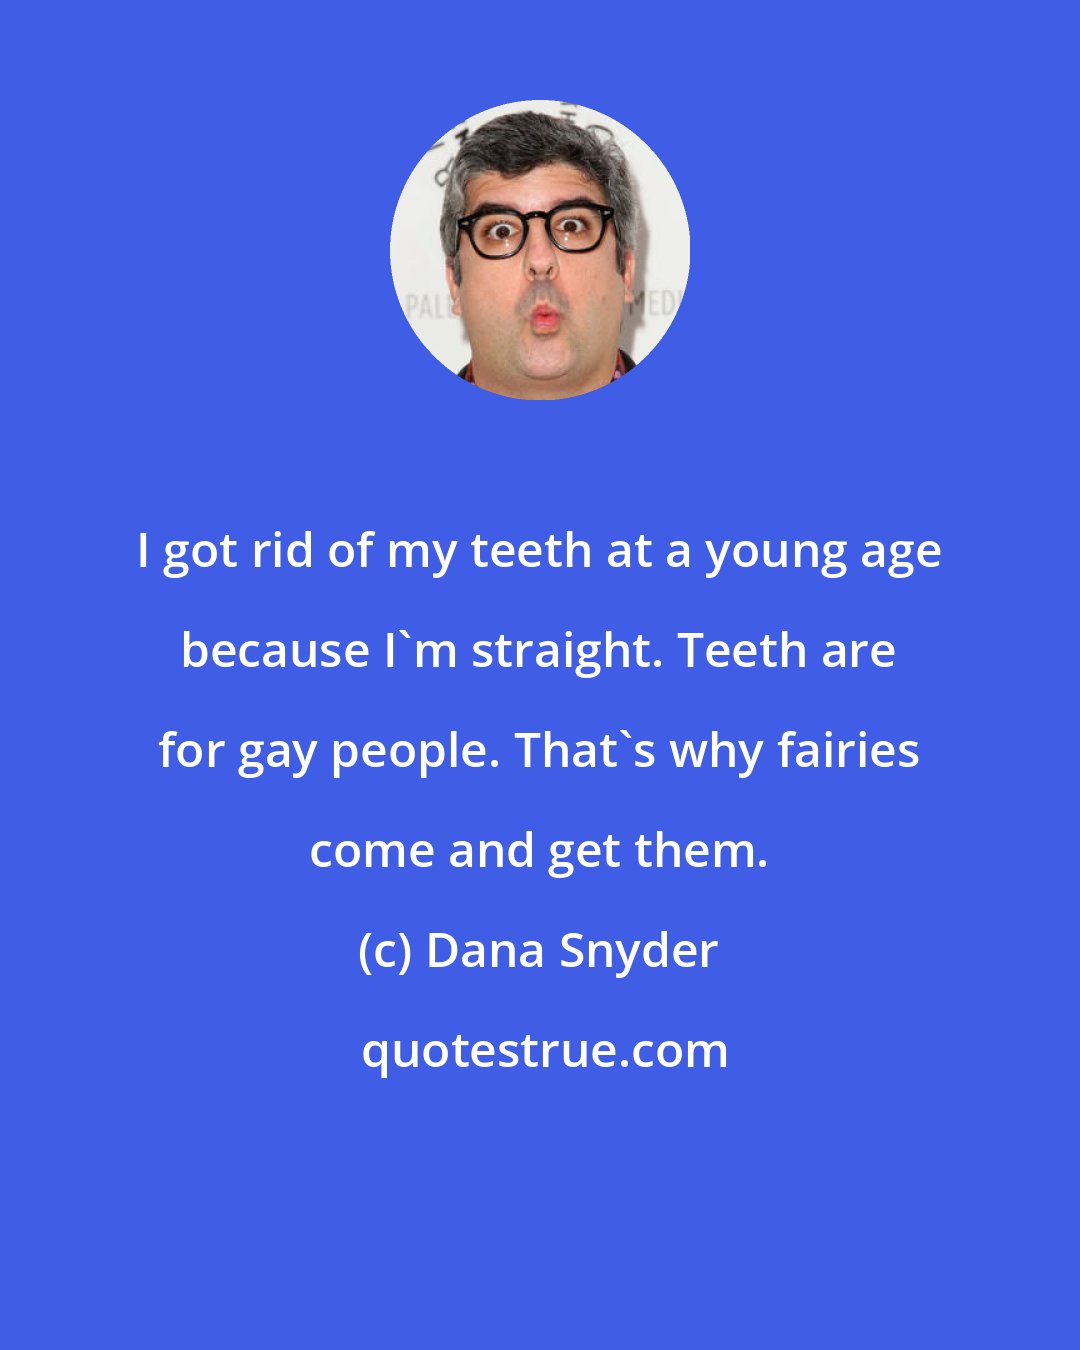 Dana Snyder: I got rid of my teeth at a young age because I'm straight. Teeth are for gay people. That's why fairies come and get them.